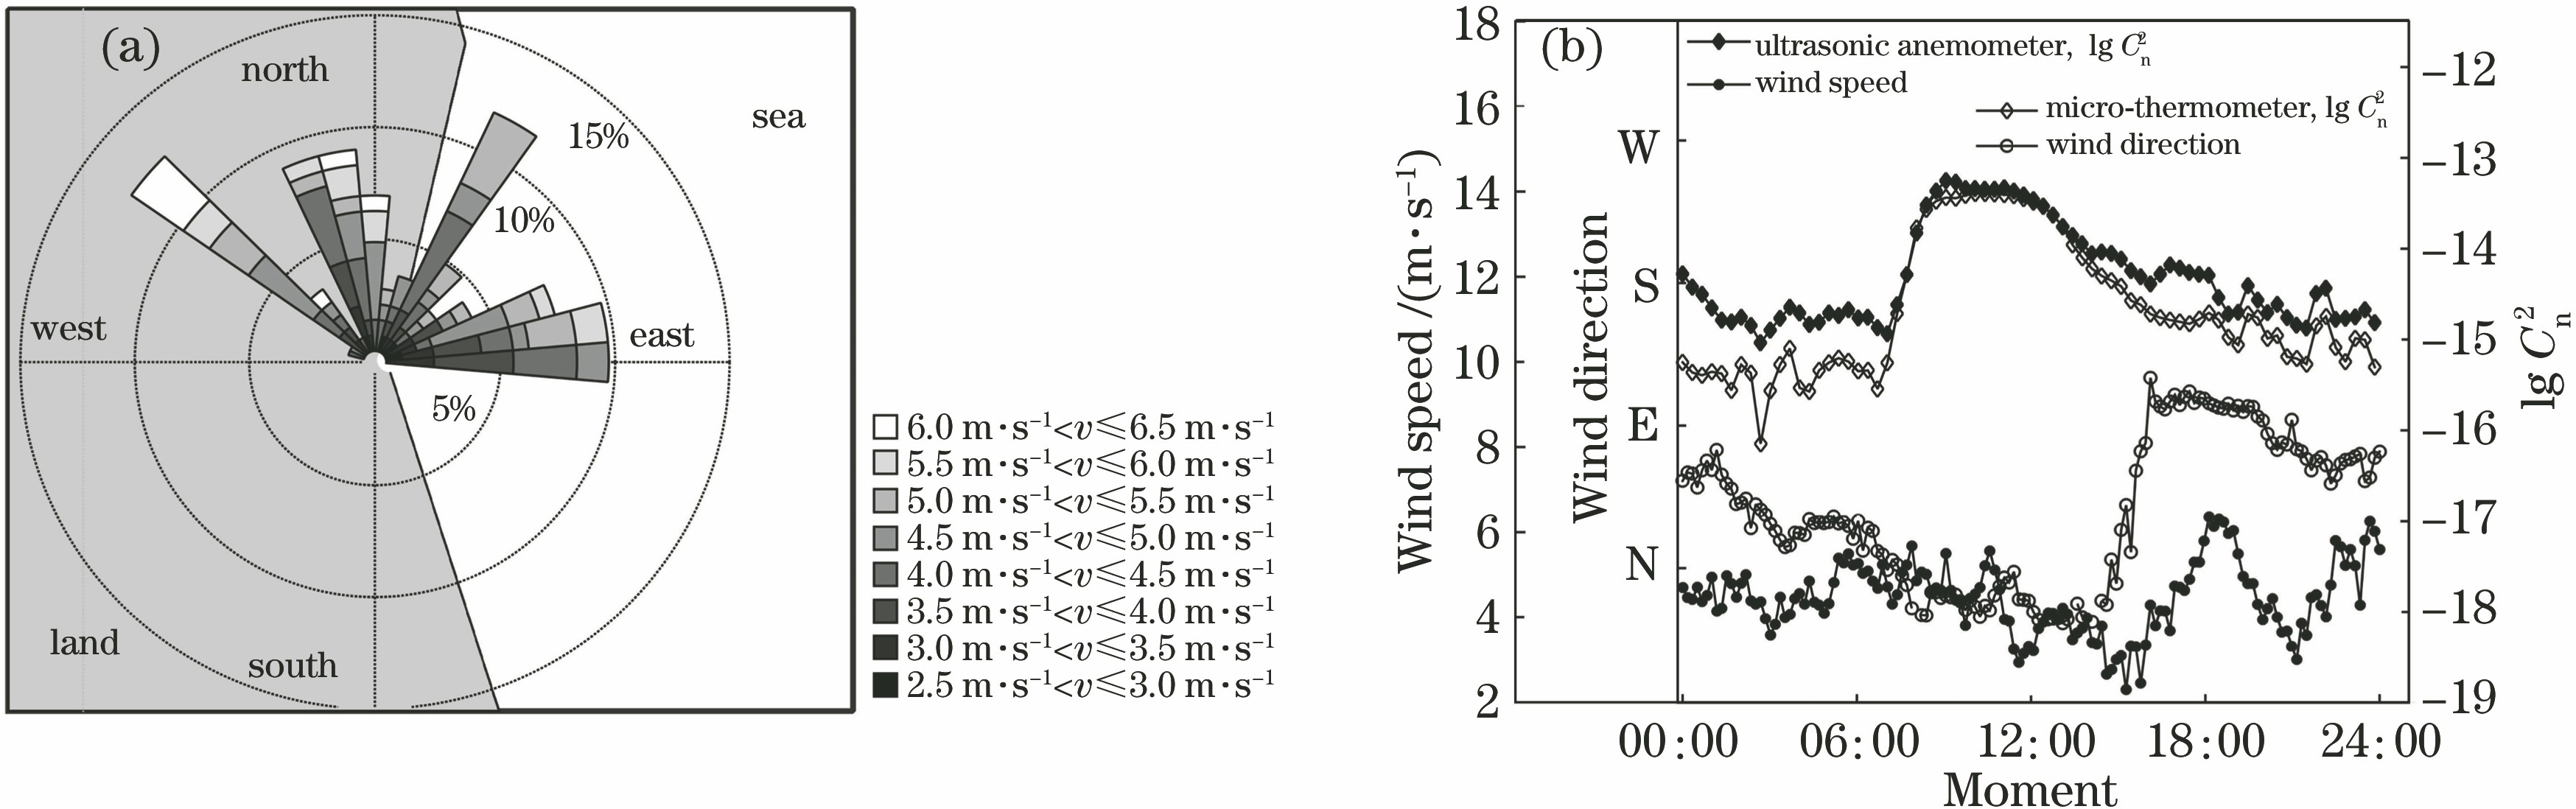 Wind speed, wind direction and turbulence intensity at 130 m above sea level. (a) Wind speed and wind direction; (b) diurnal variation of wind direction, wind speed and Cn2